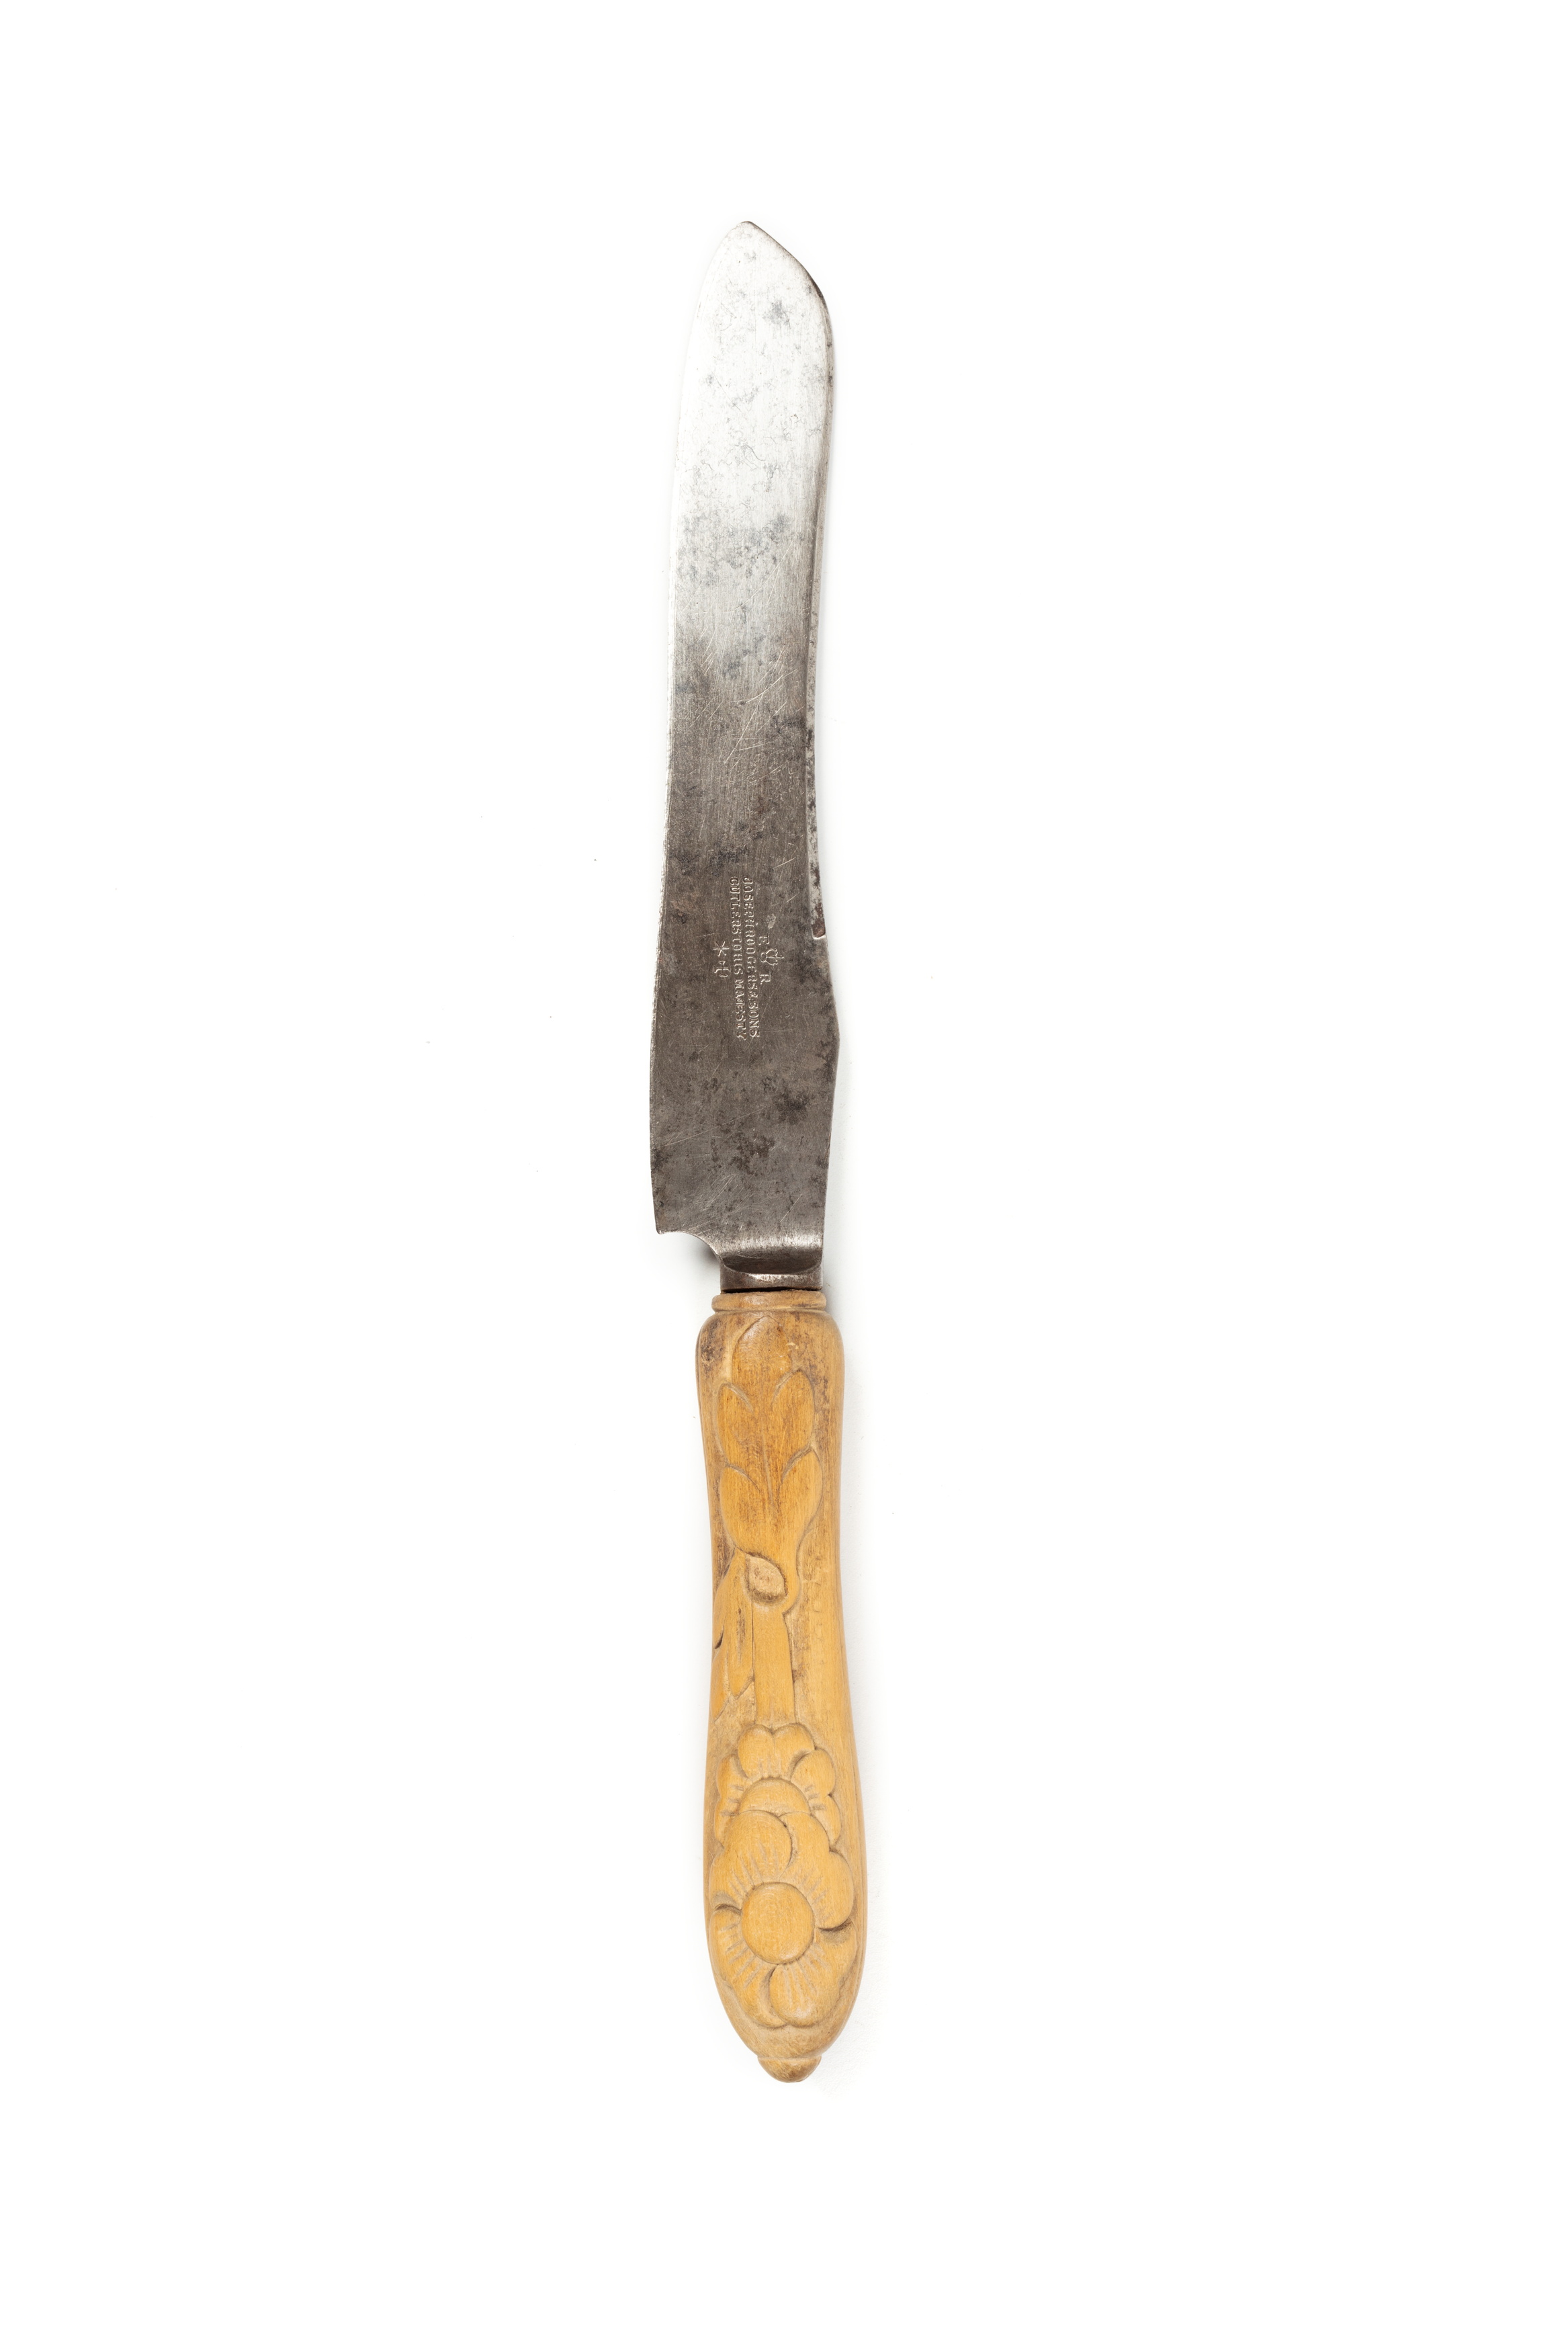 Bread knife by Joseph Rodgers & Sons